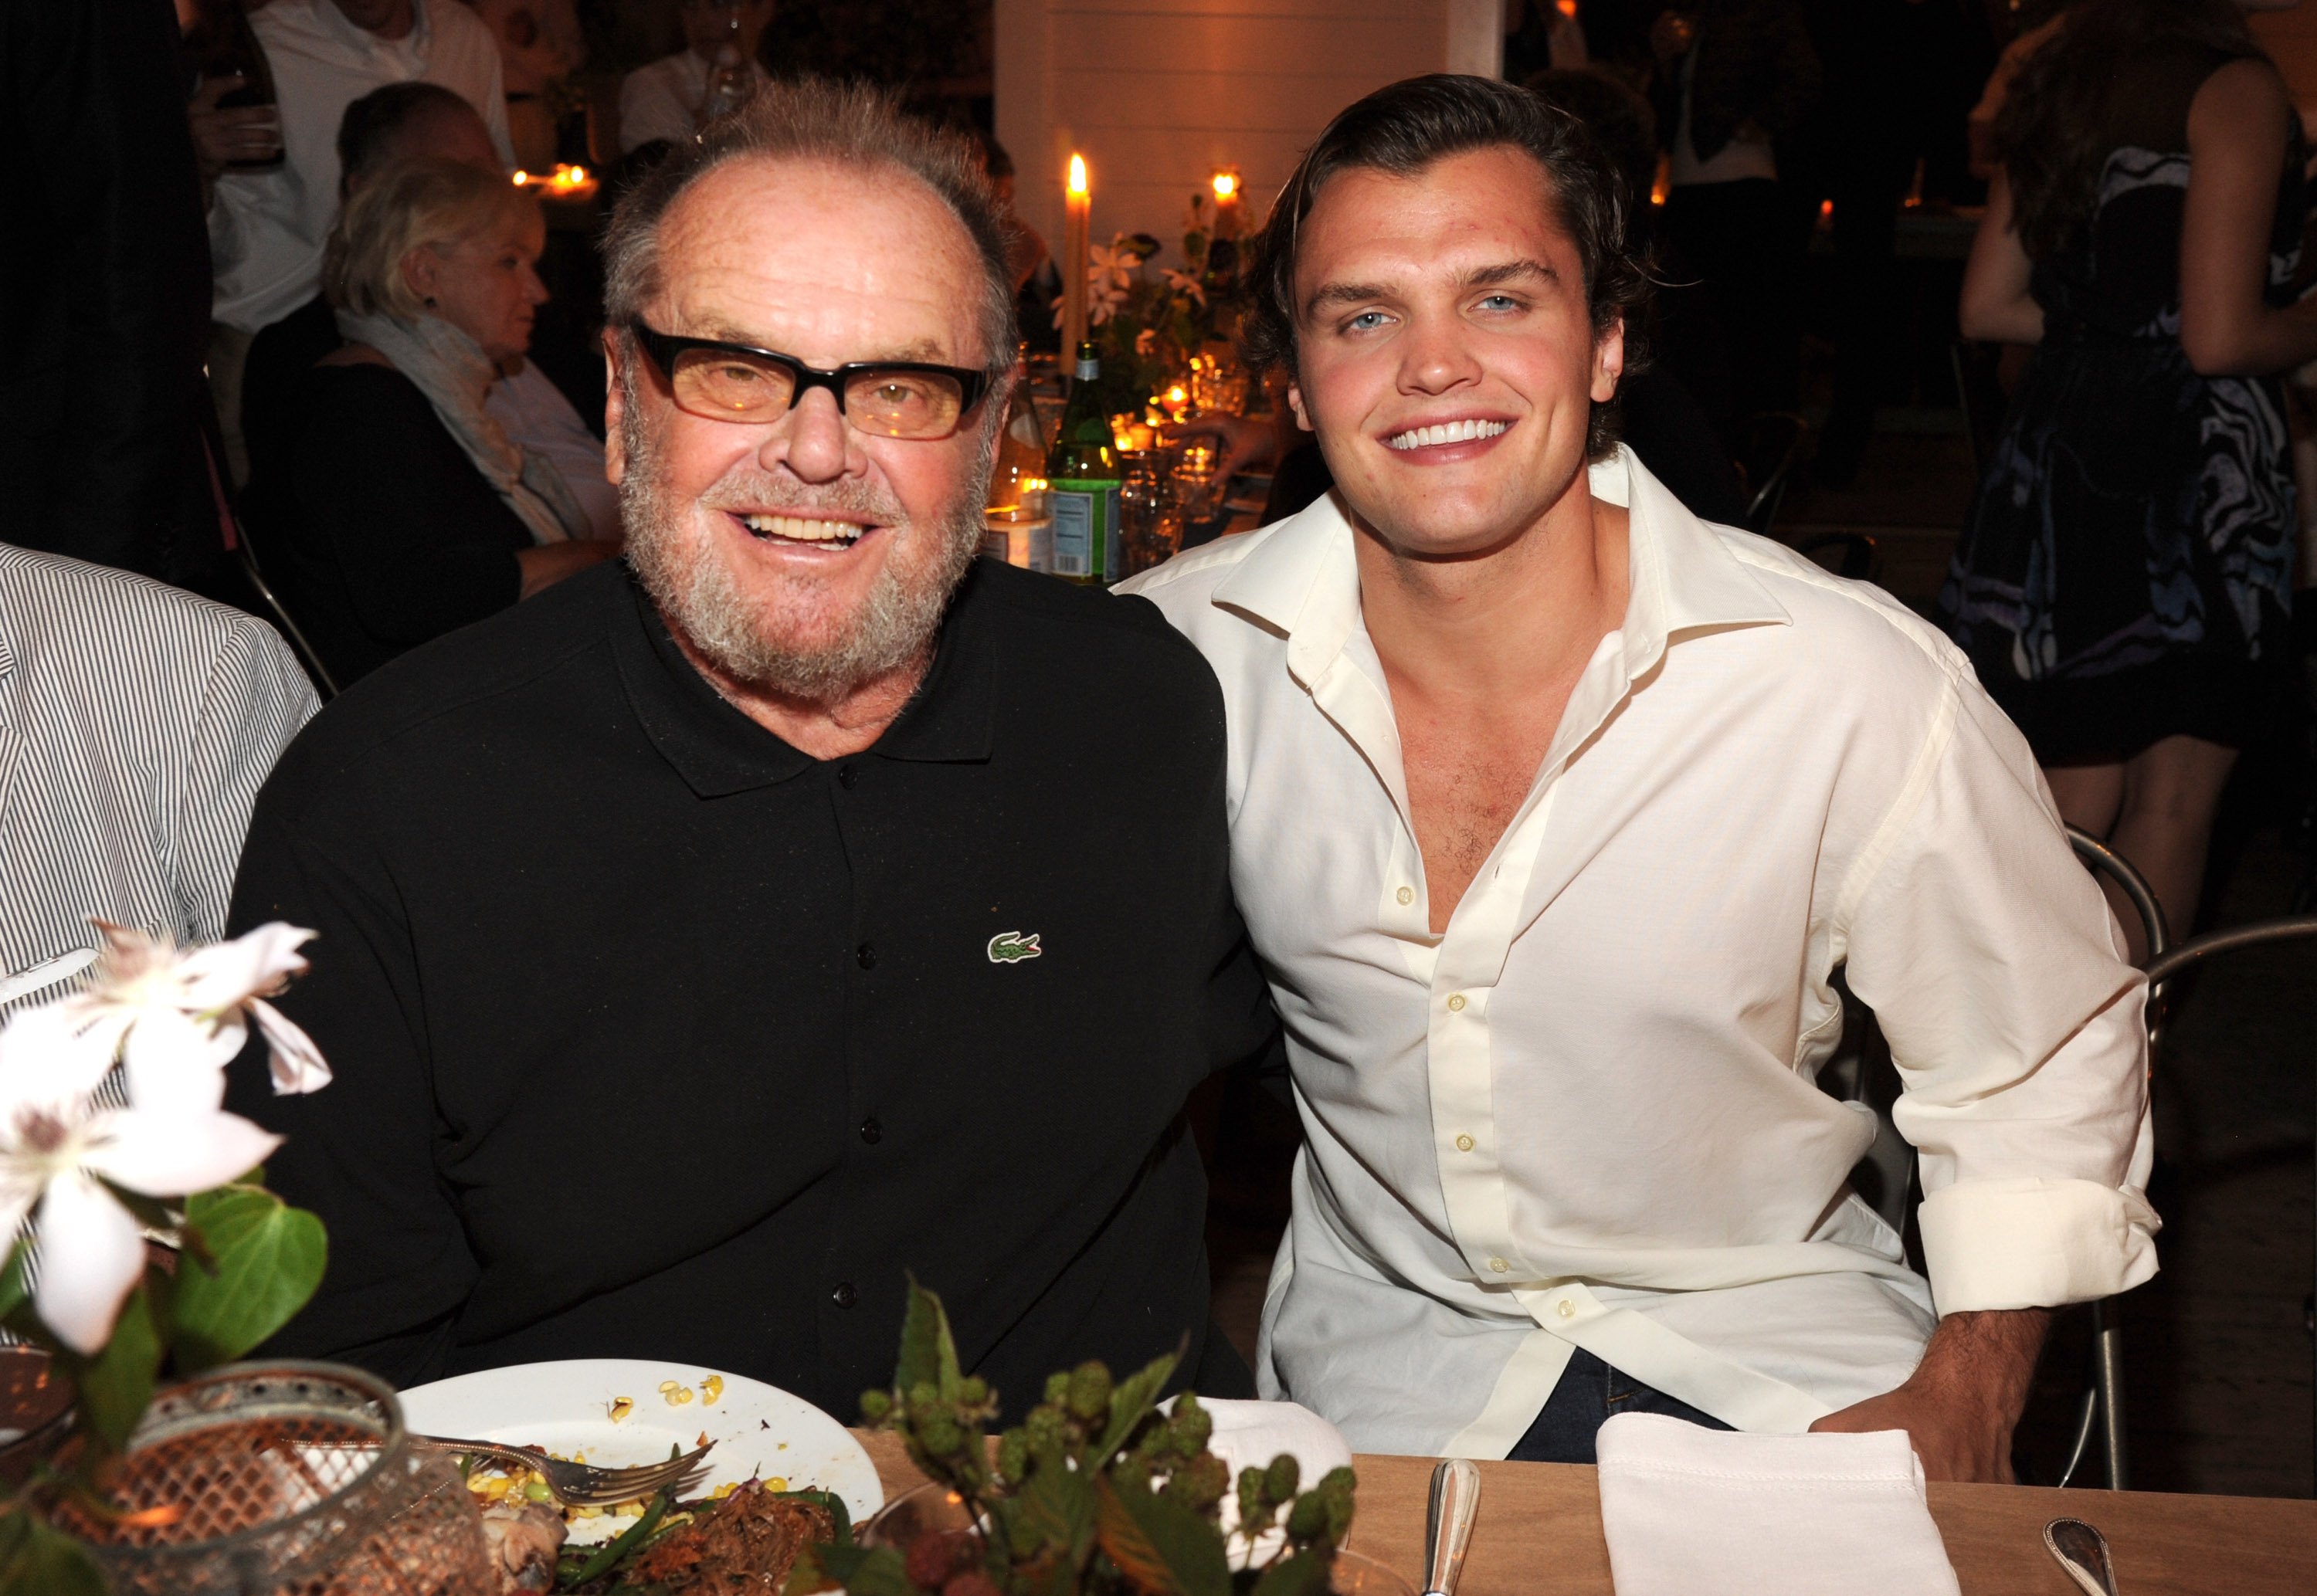 Jack Nicholson and his son, Ray Nicholson, attend Apollo in the Hamptons at The Creeks. August 16, 2014 in East Hampton, New York. | Source: Getty Images 